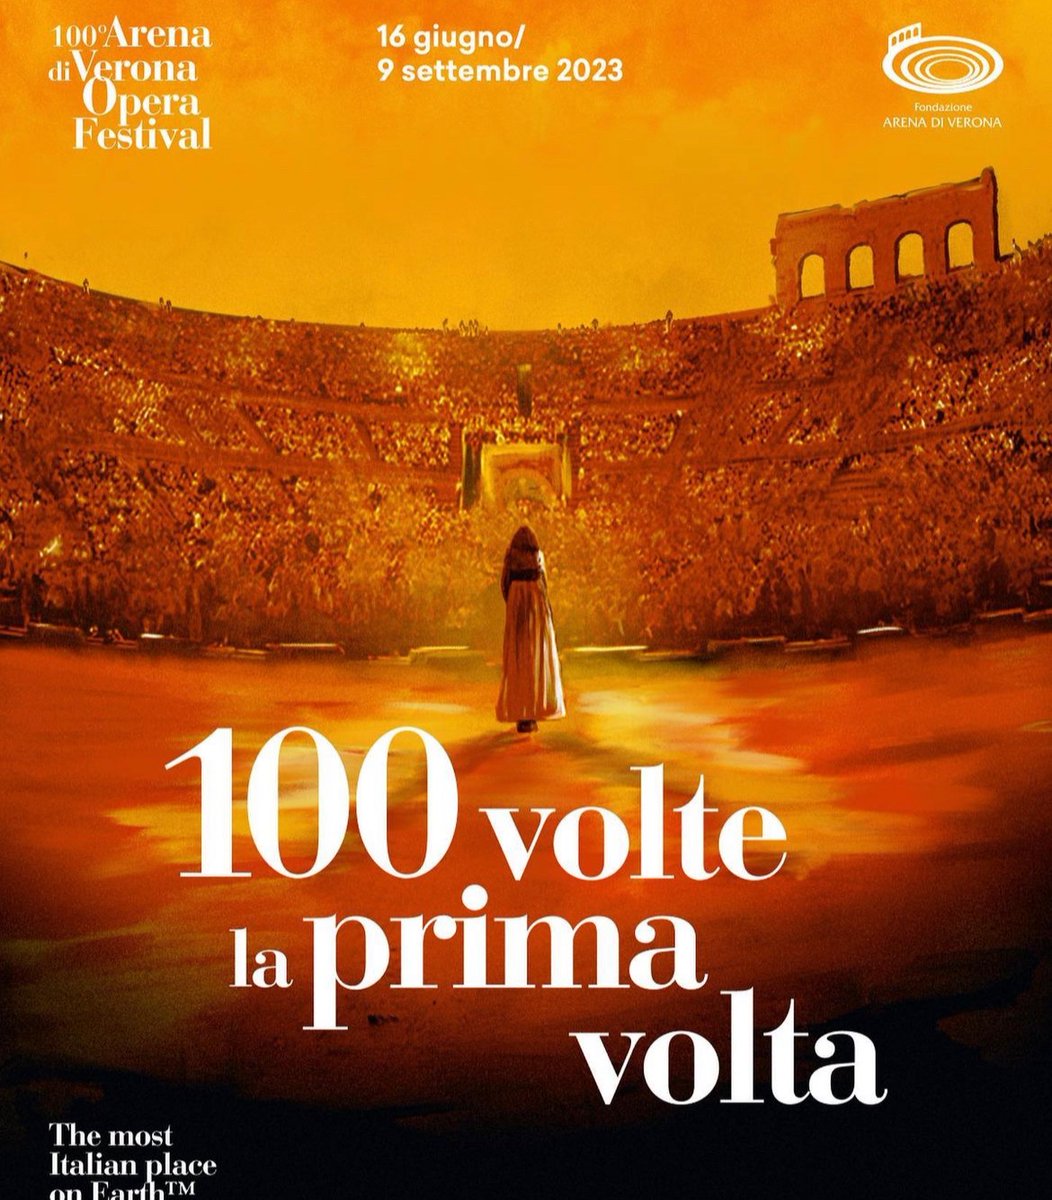 I'm proud to announce my participation at the 100th anniversary summer season of the legendary @arenadiverona❤️🤩❤️. This summer I will open the festival in a new production of #Aida, and then will sing the Duke of Mantua in the premiere of a new 🤩production of #Rigoletto!